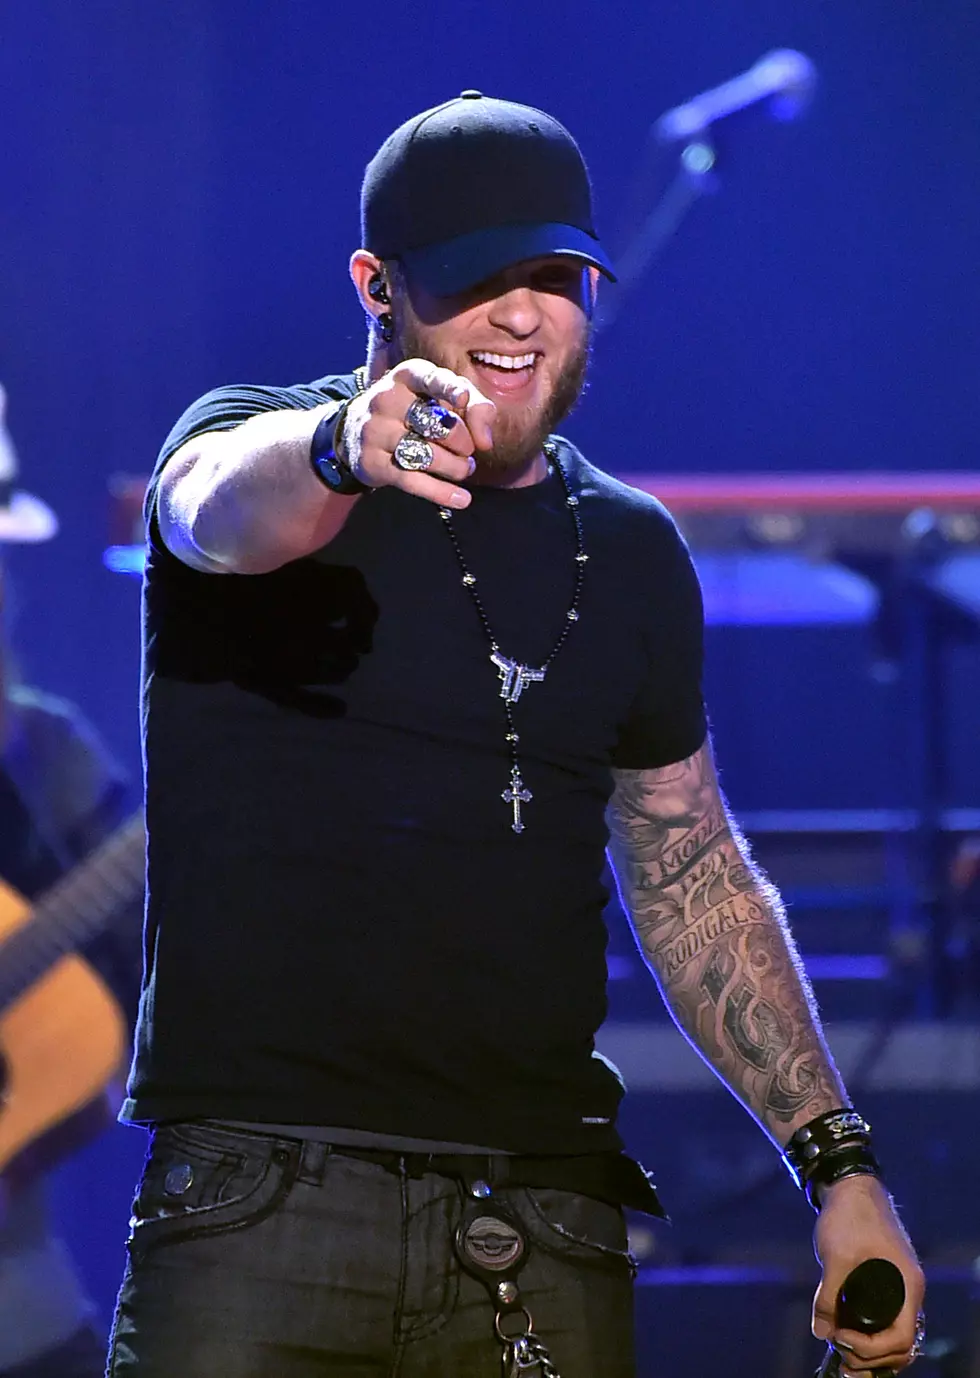 Hang with Brantley Gilbert in Chicago